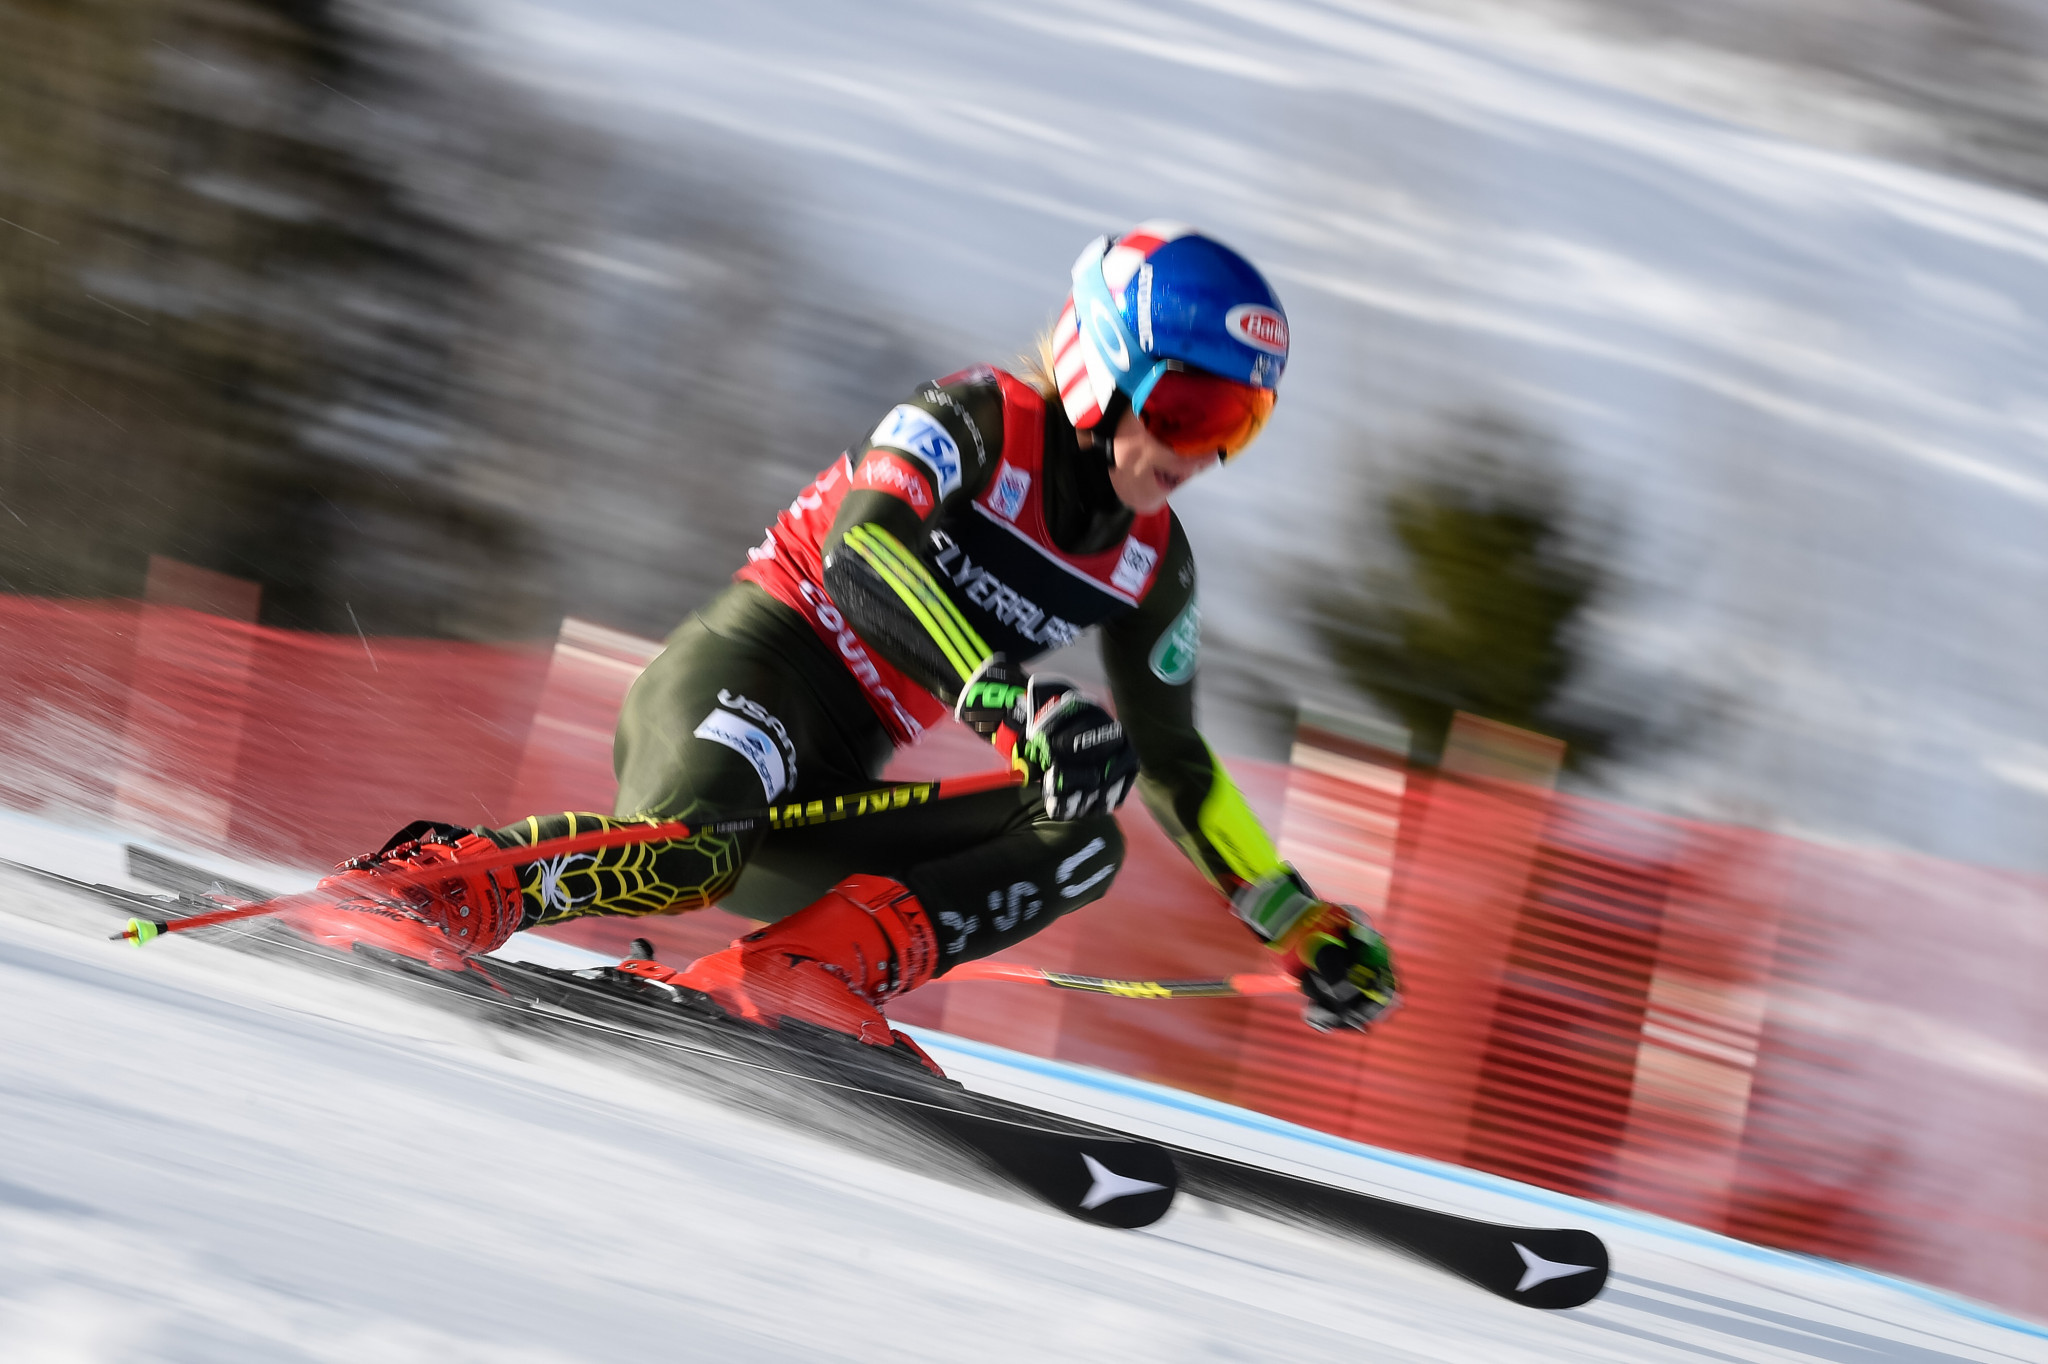 Shiffrin looking to bounce back at FIS Alpine Skiing World Cup in Lienz